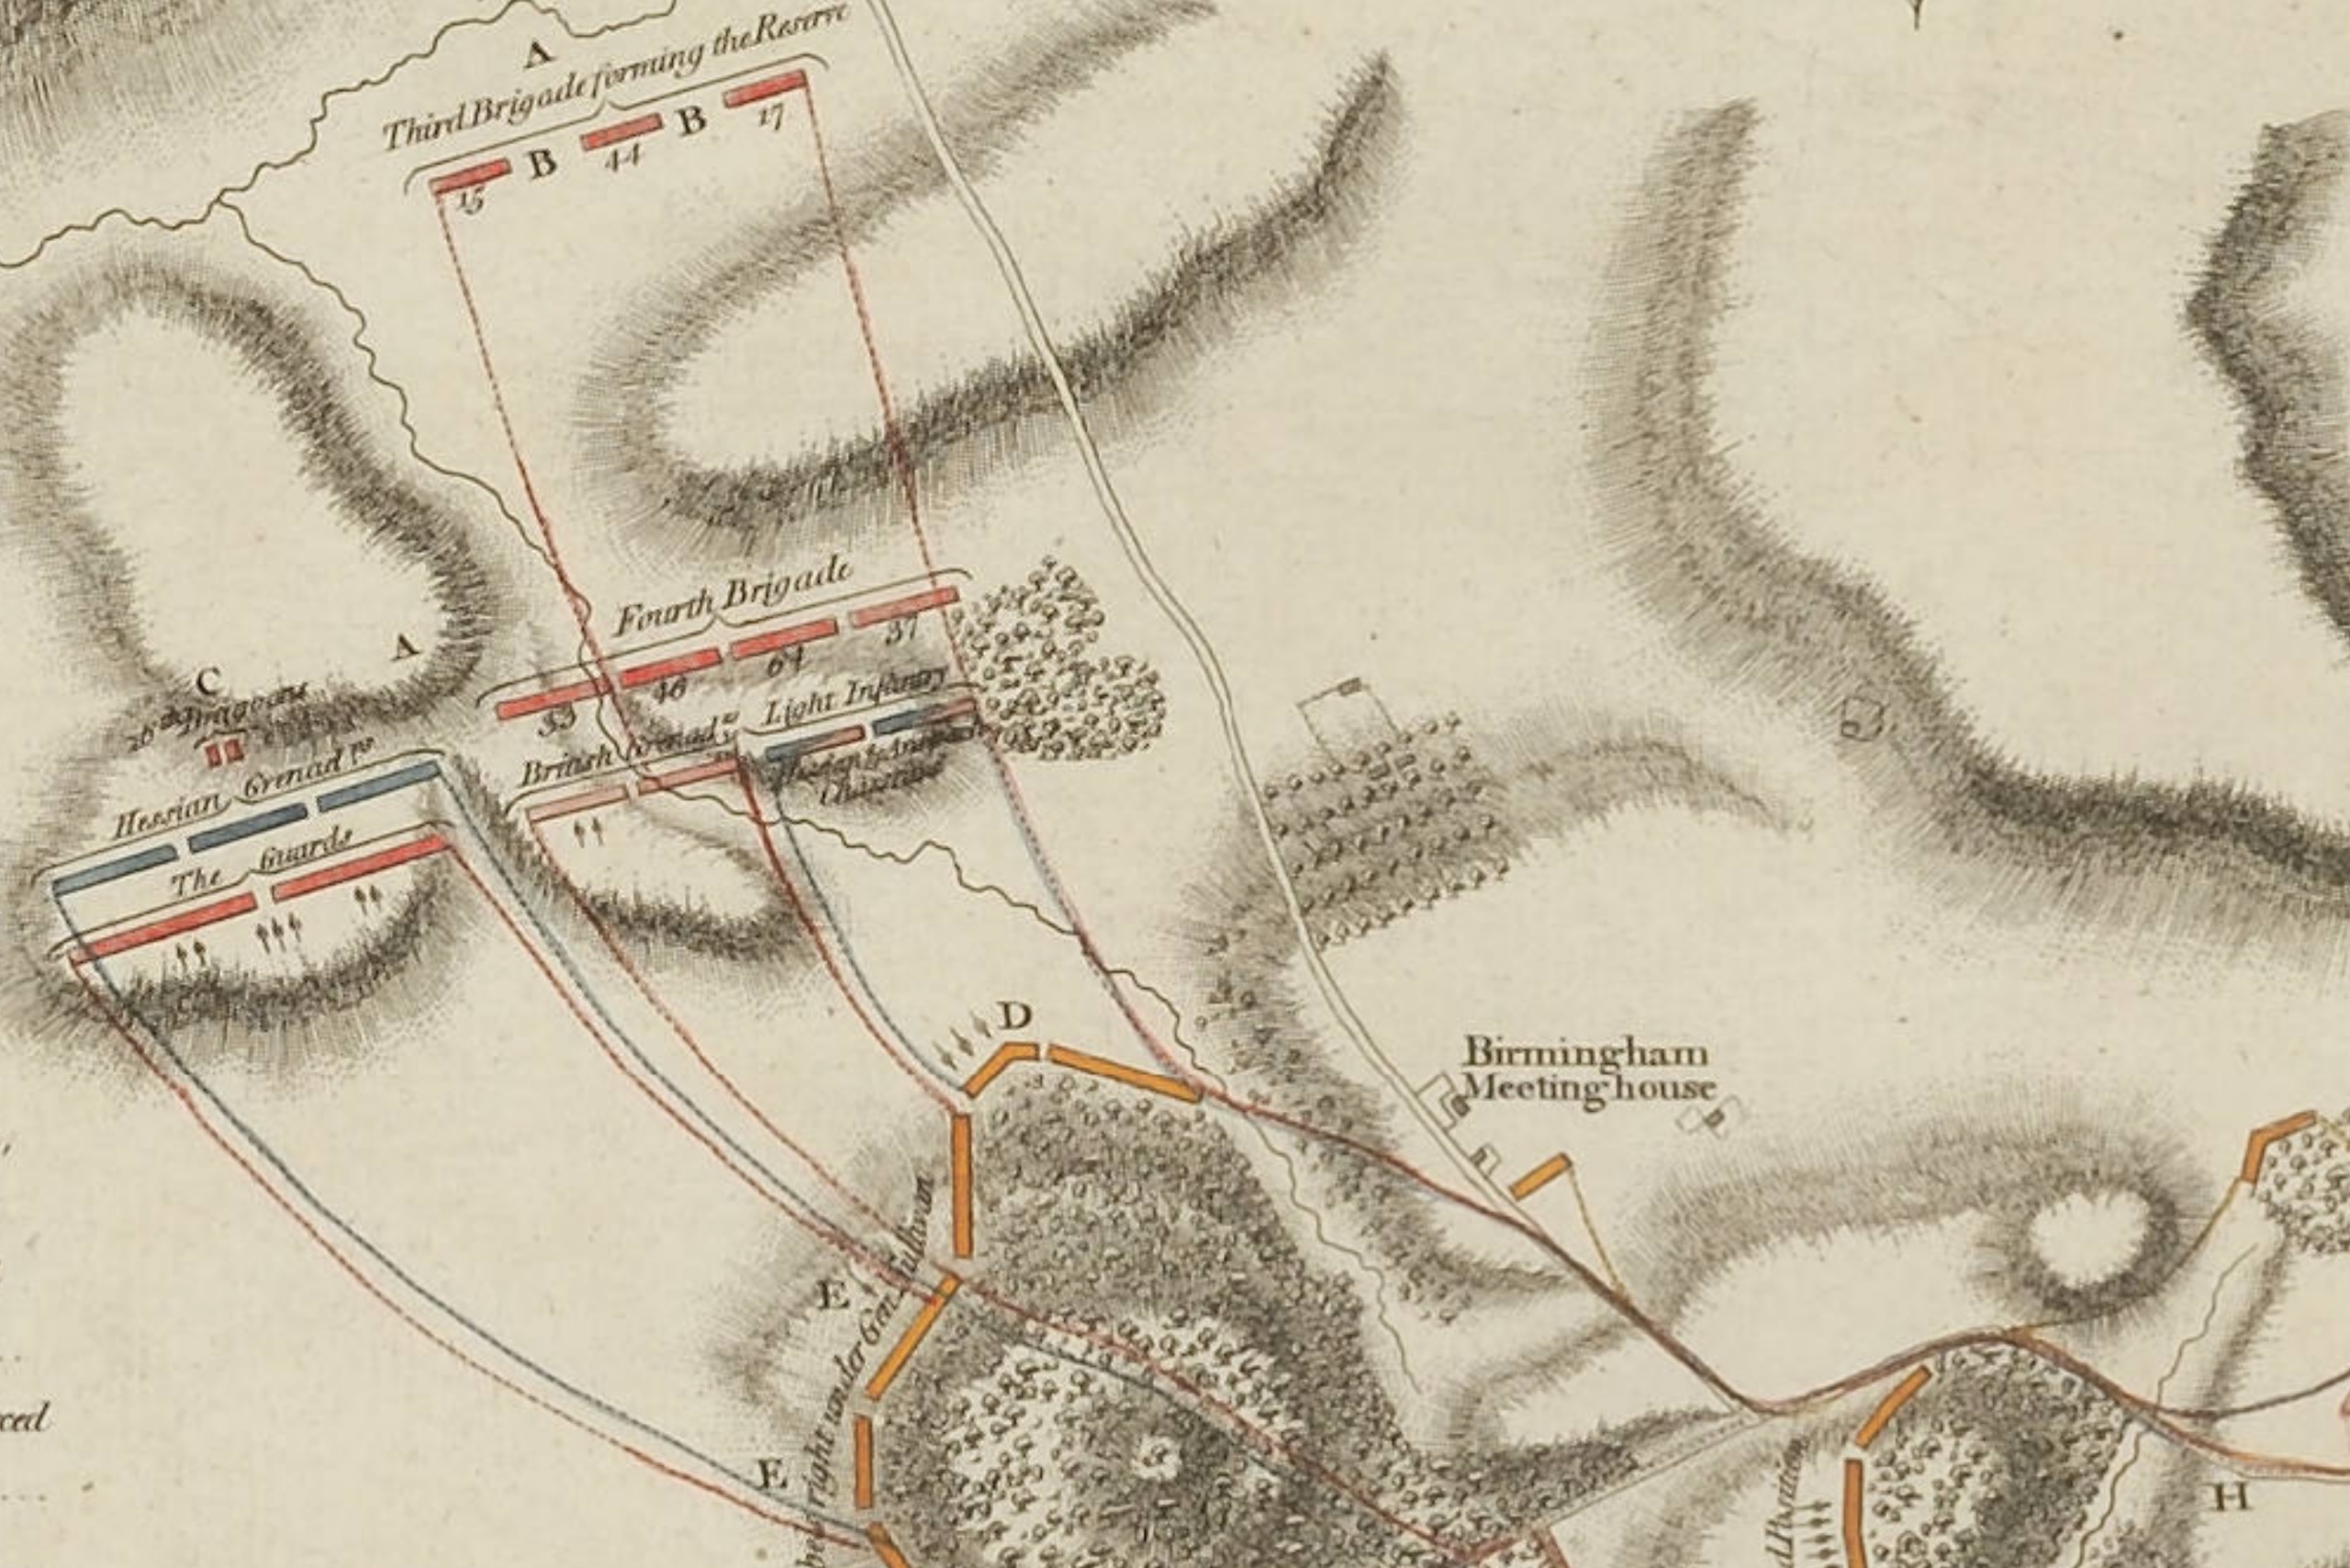 This map of the Battle of Brandywine by a Hessian officer, published in London in 1778, is one of ten great Revolutionary War maps.